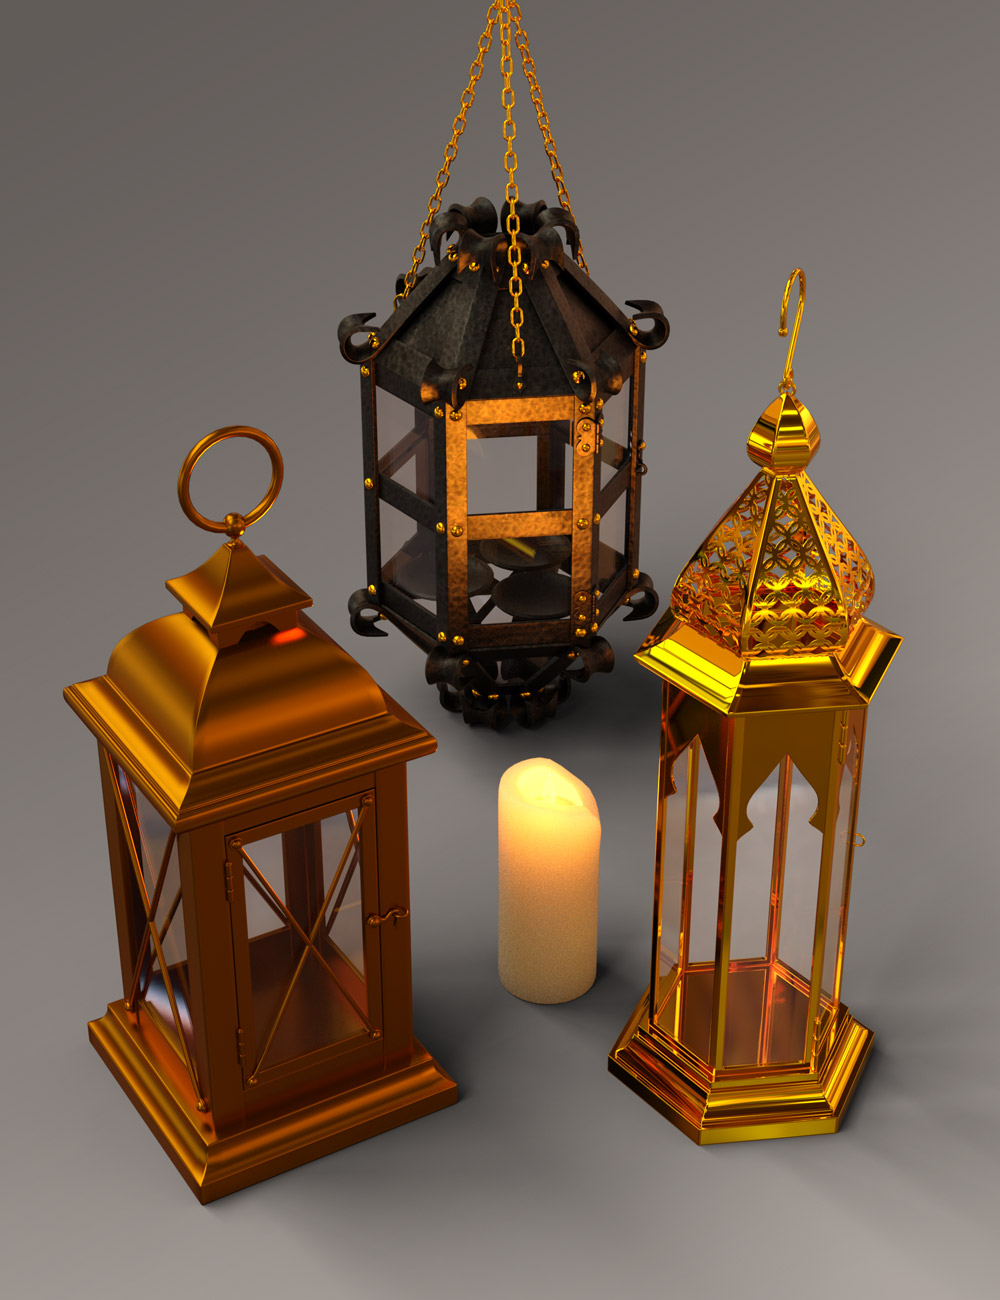 Antique Lanterns by: Age of Armour, 3D Models by Daz 3D